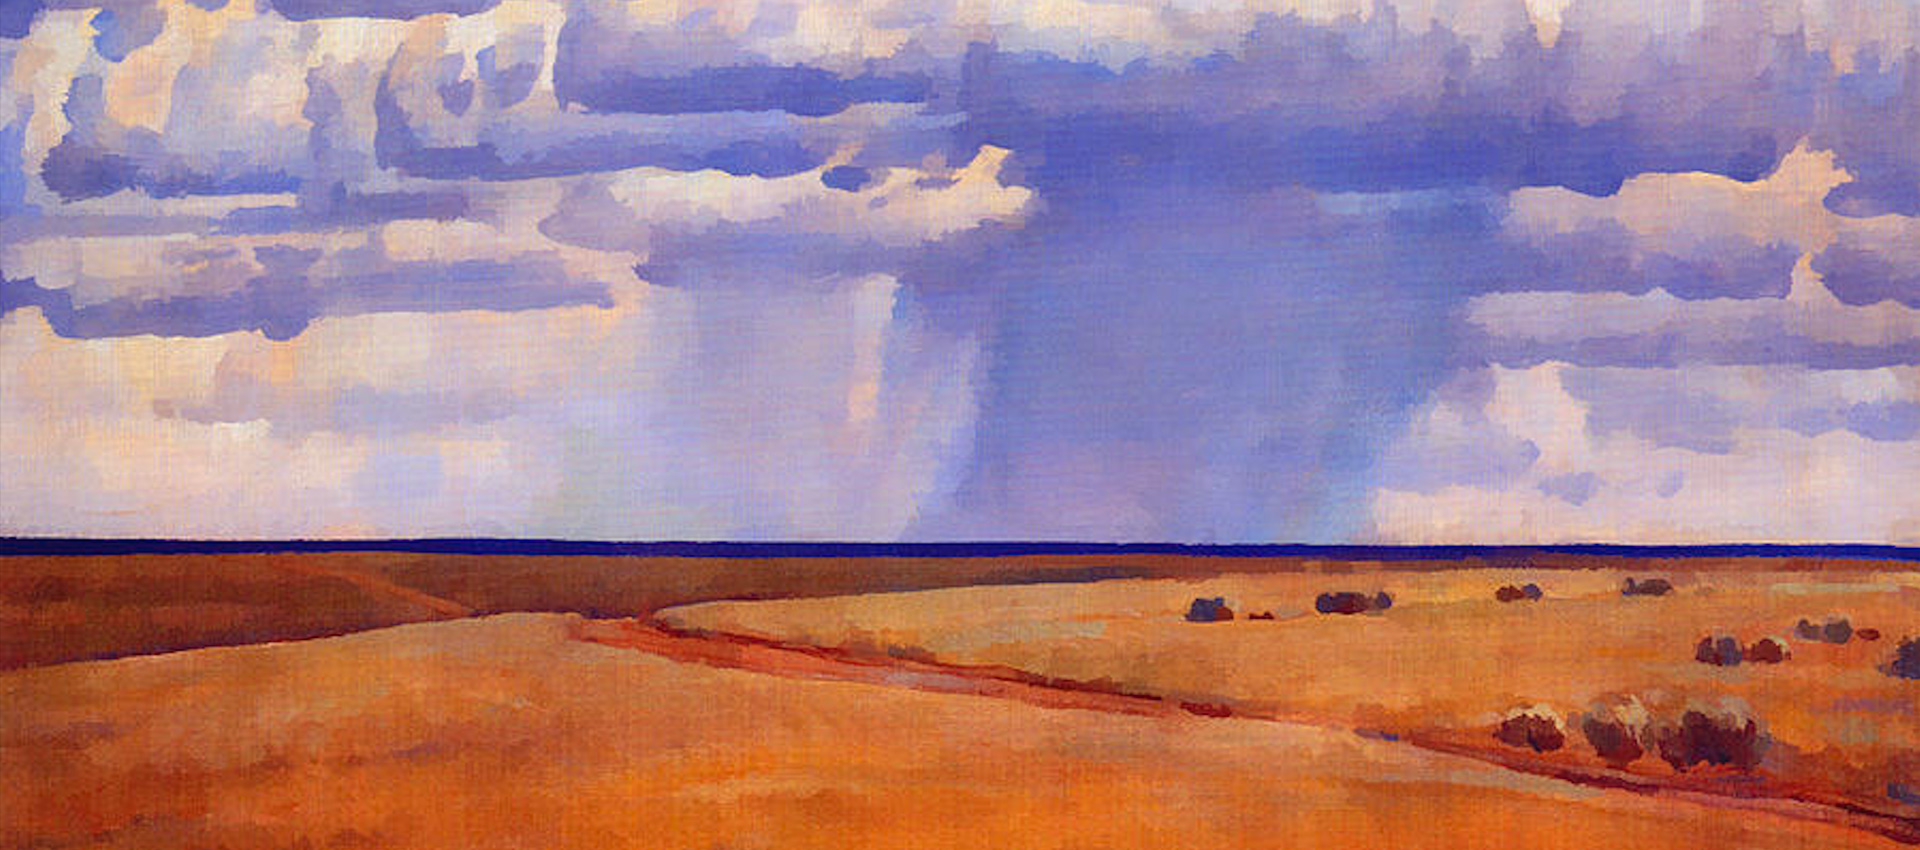 painting of yellow plains and blue sky by Maynard Dixon.